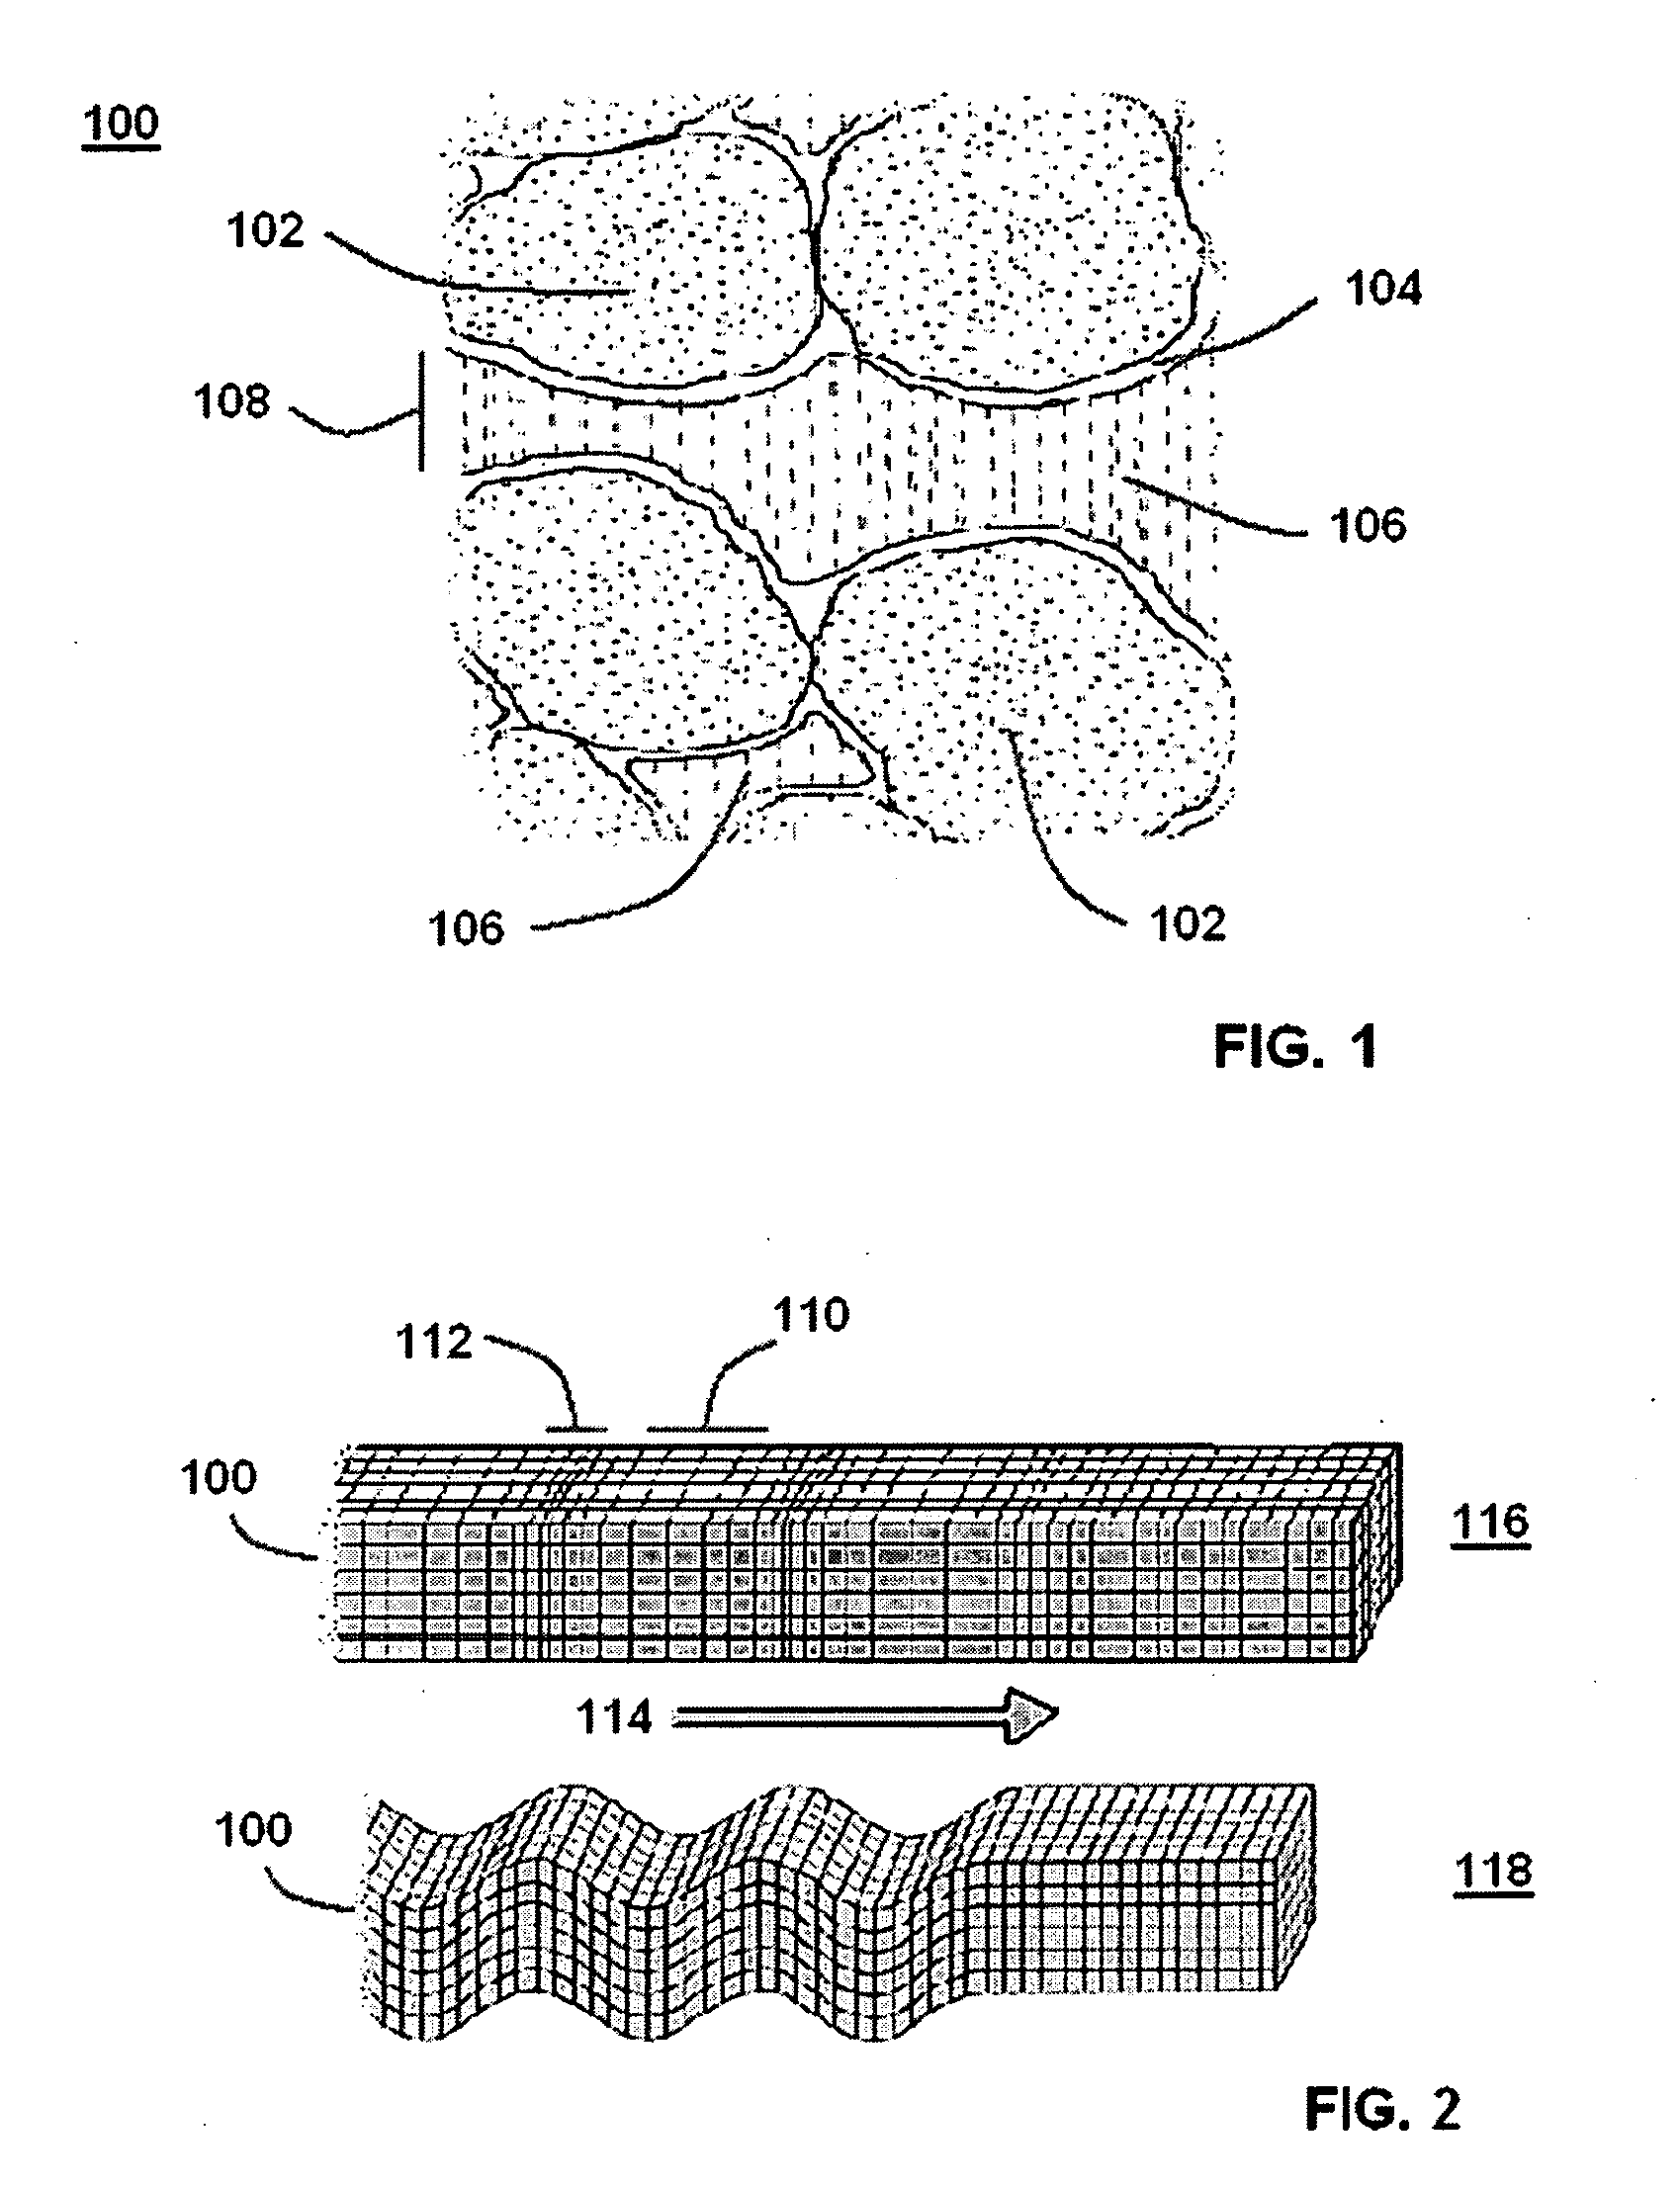 System and method for enhanced oil recovery using an in-situ seismic energy generator